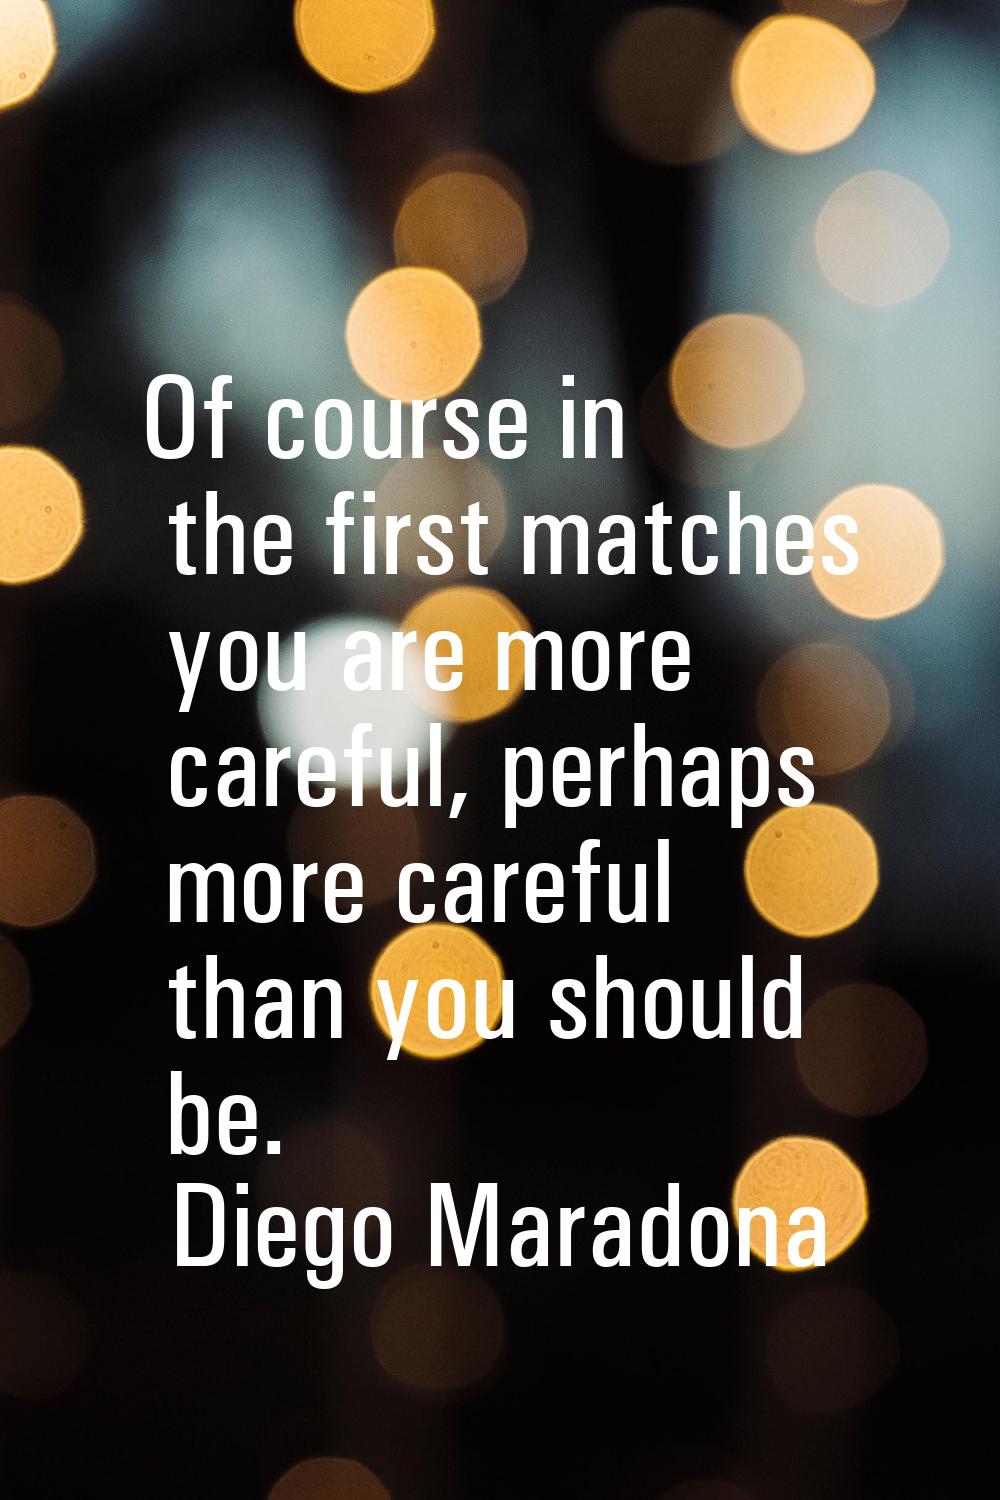 Of course in the first matches you are more careful, perhaps more careful than you should be.